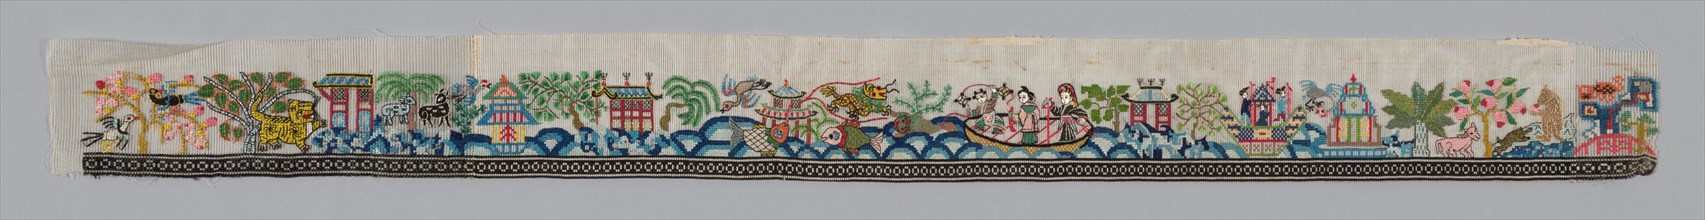 Border (from Woman's Garment), China, 1875/1900. Creator: Unknown.